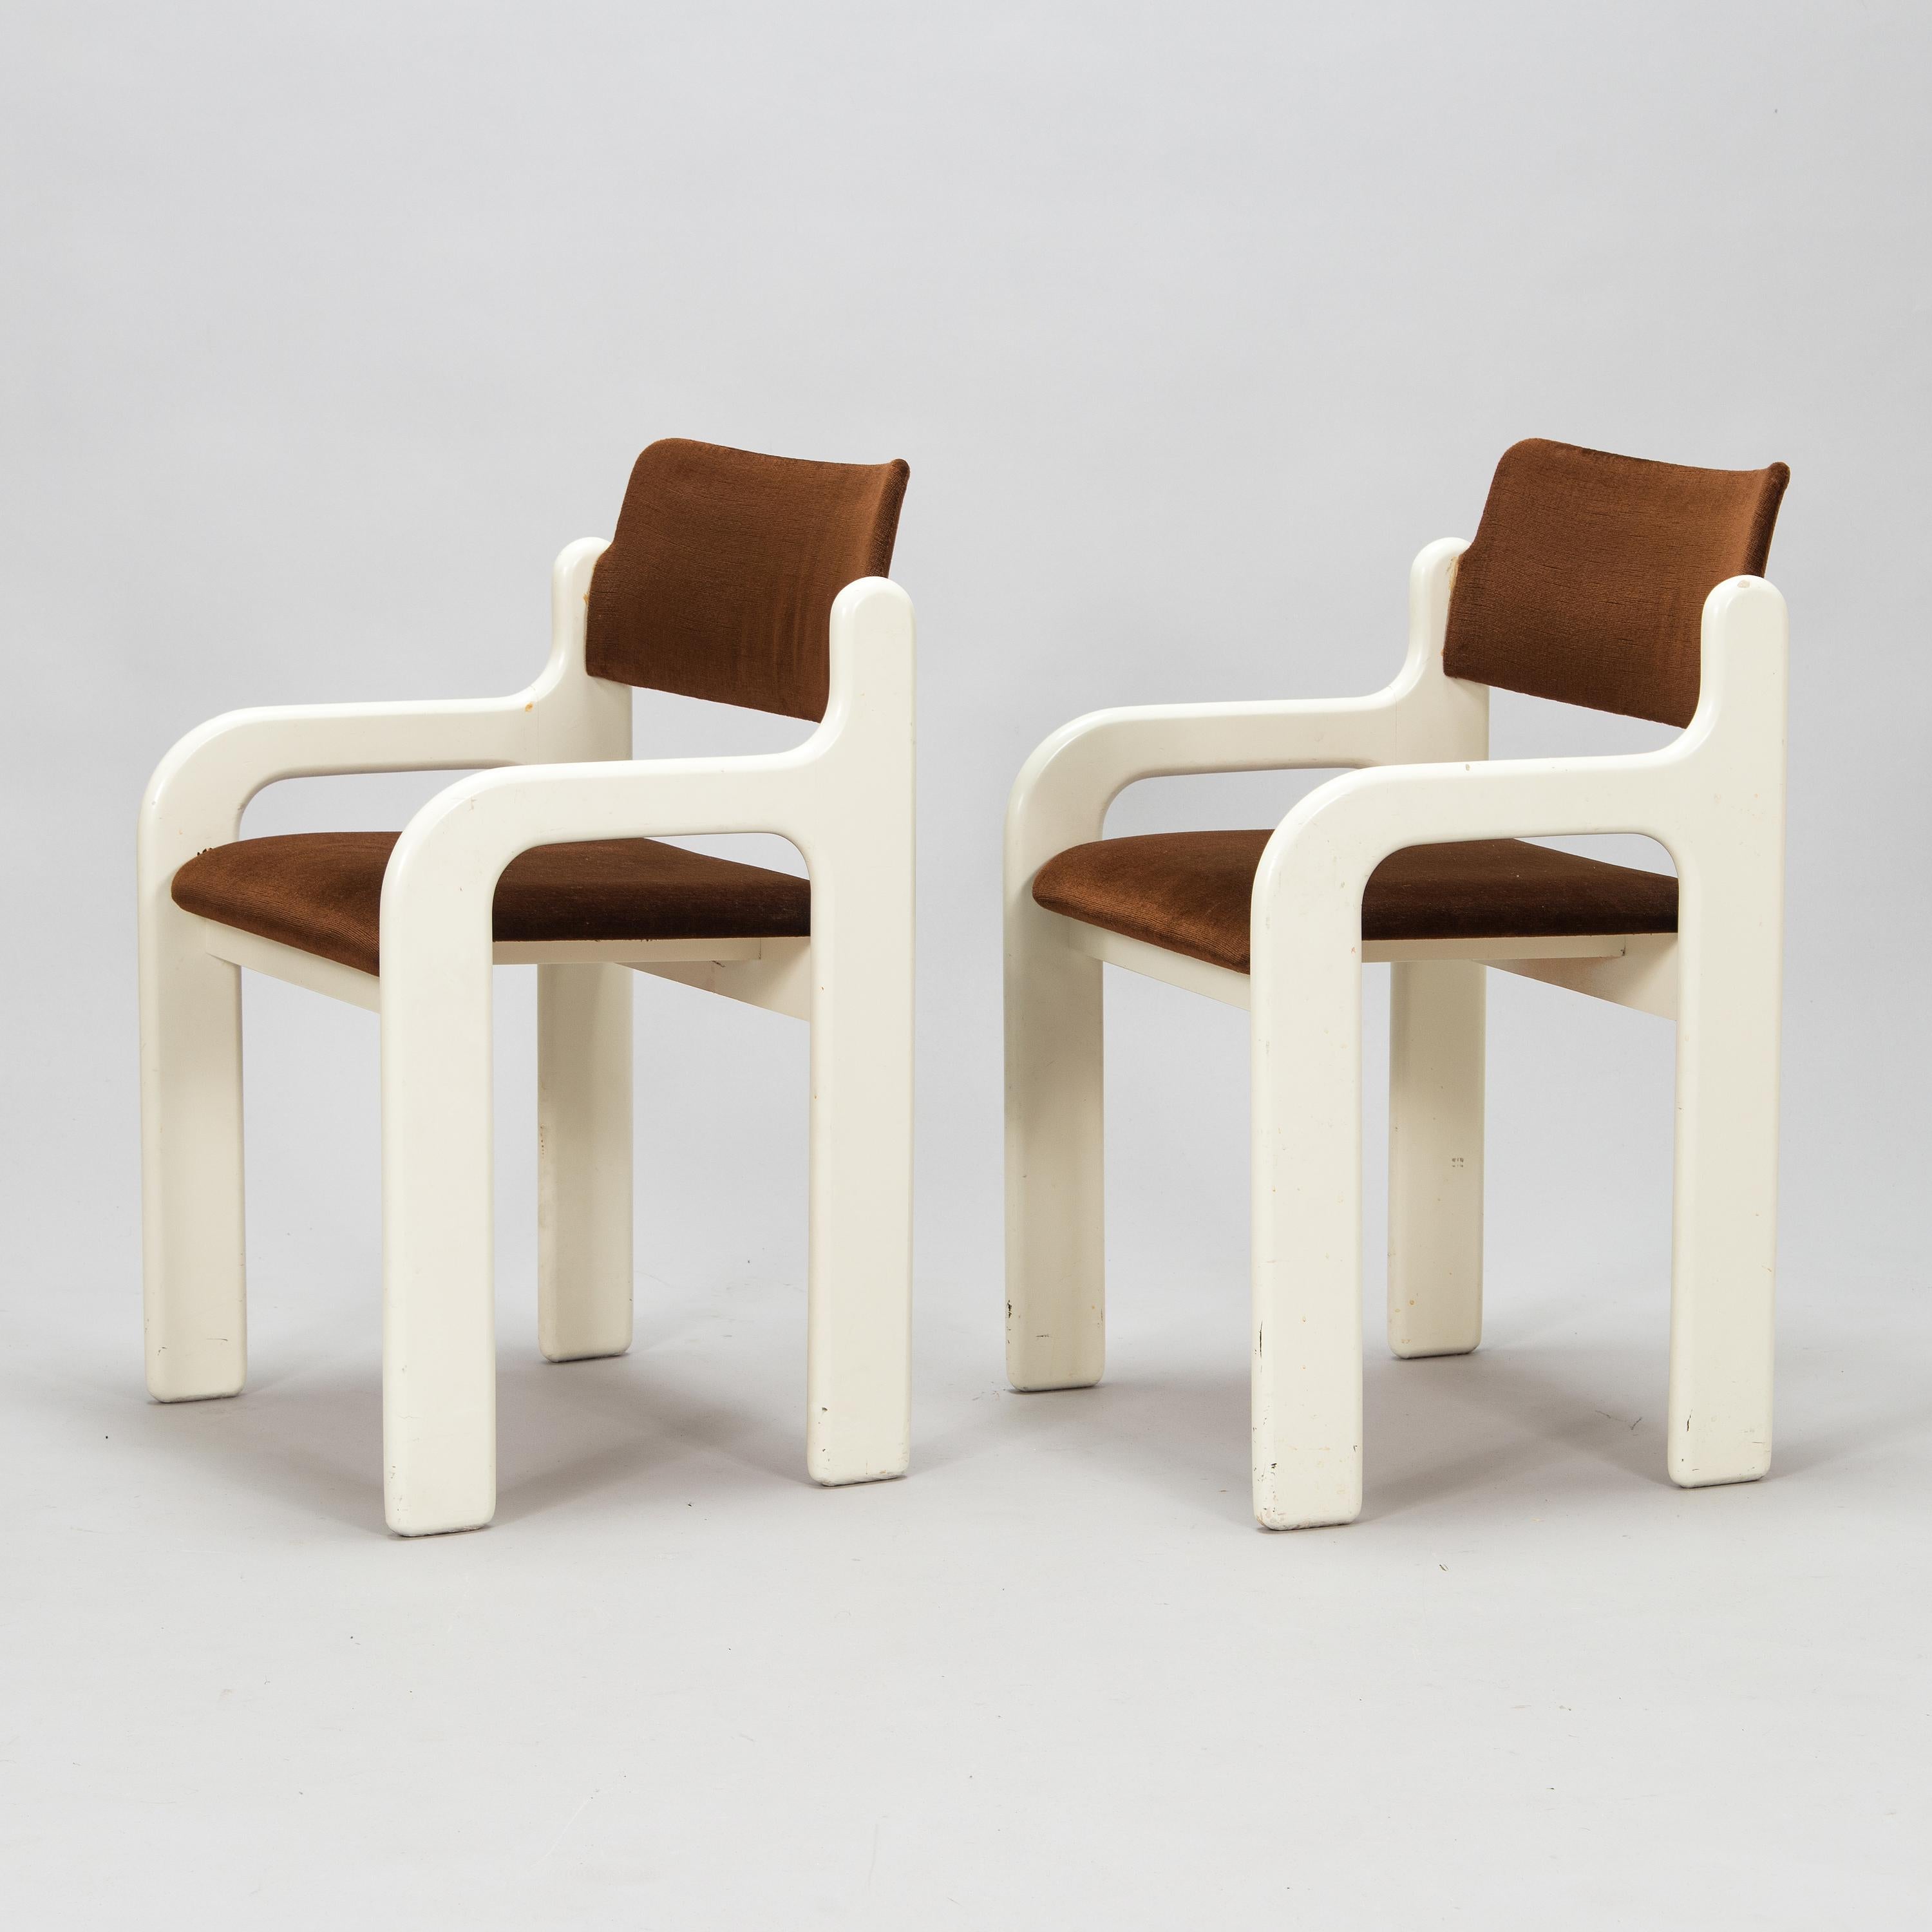 20th Century Eero Aarnio 4 Chairs Model Flamingo for Asko Finland Marked, 1970s 